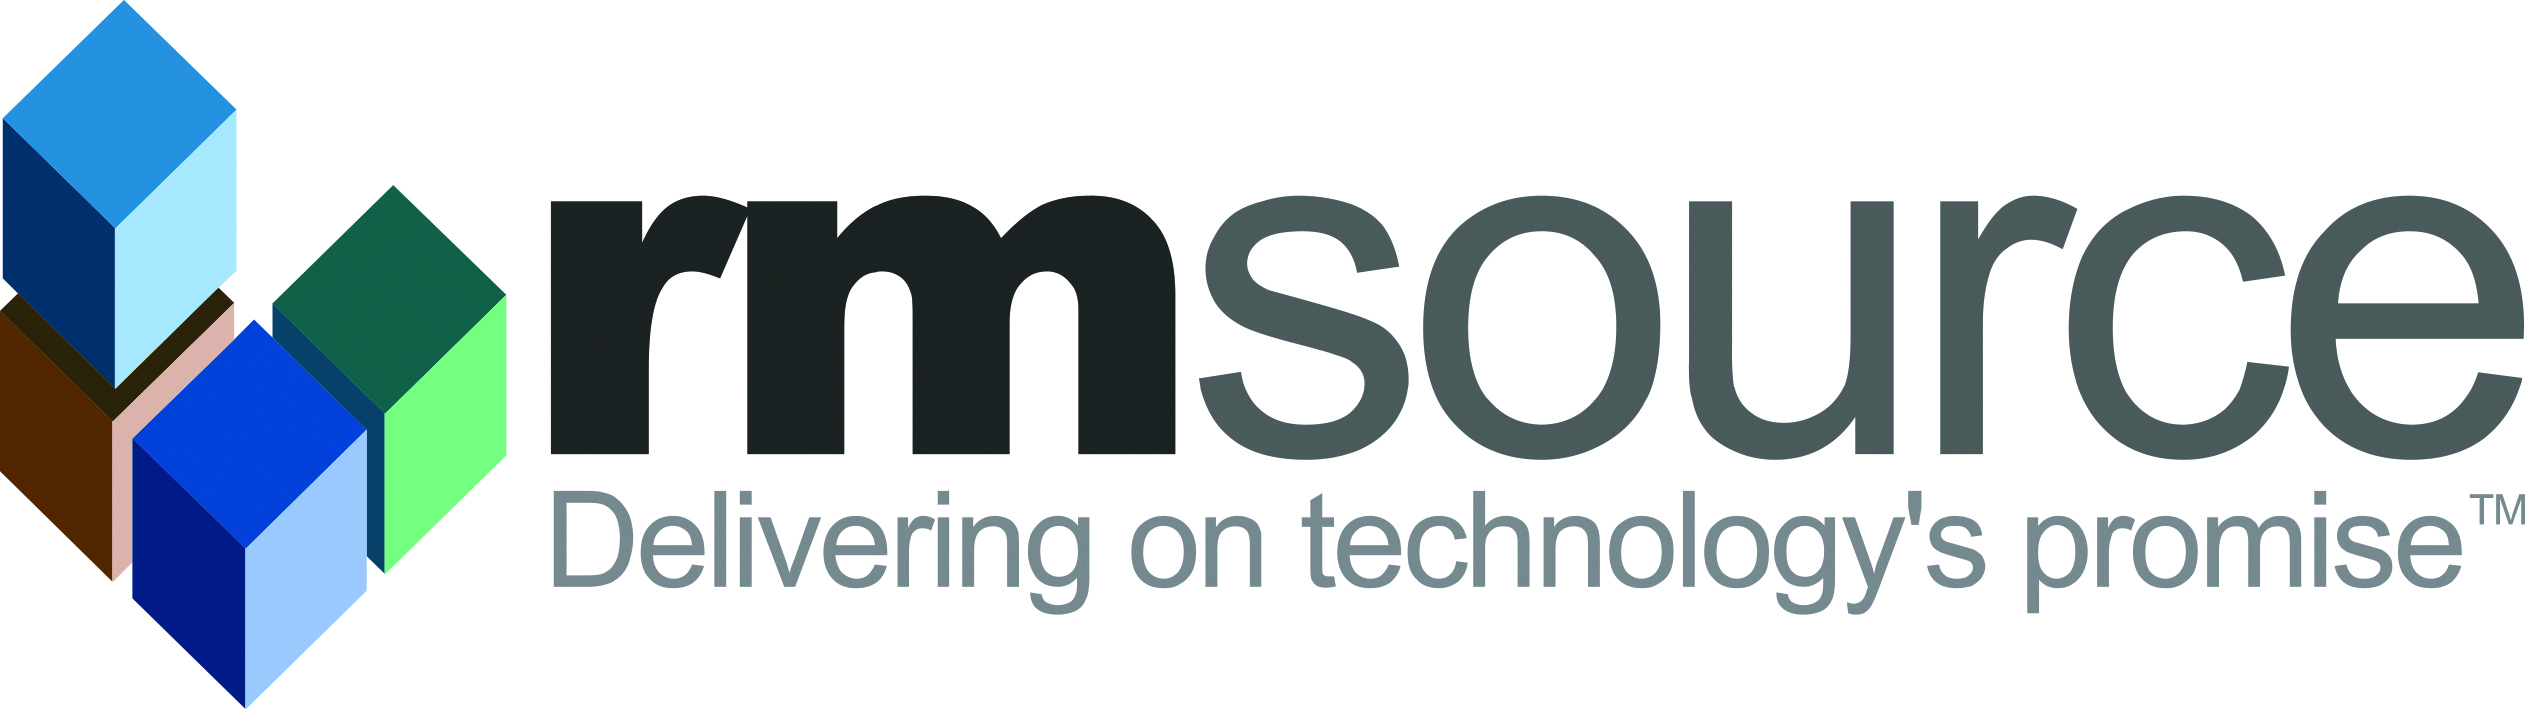 rmsource, Inc. is a leading provider of IT solutions with over 15 years of industry expertise. We provide a full range of IT consulting, managed solutions and software development services, all unique